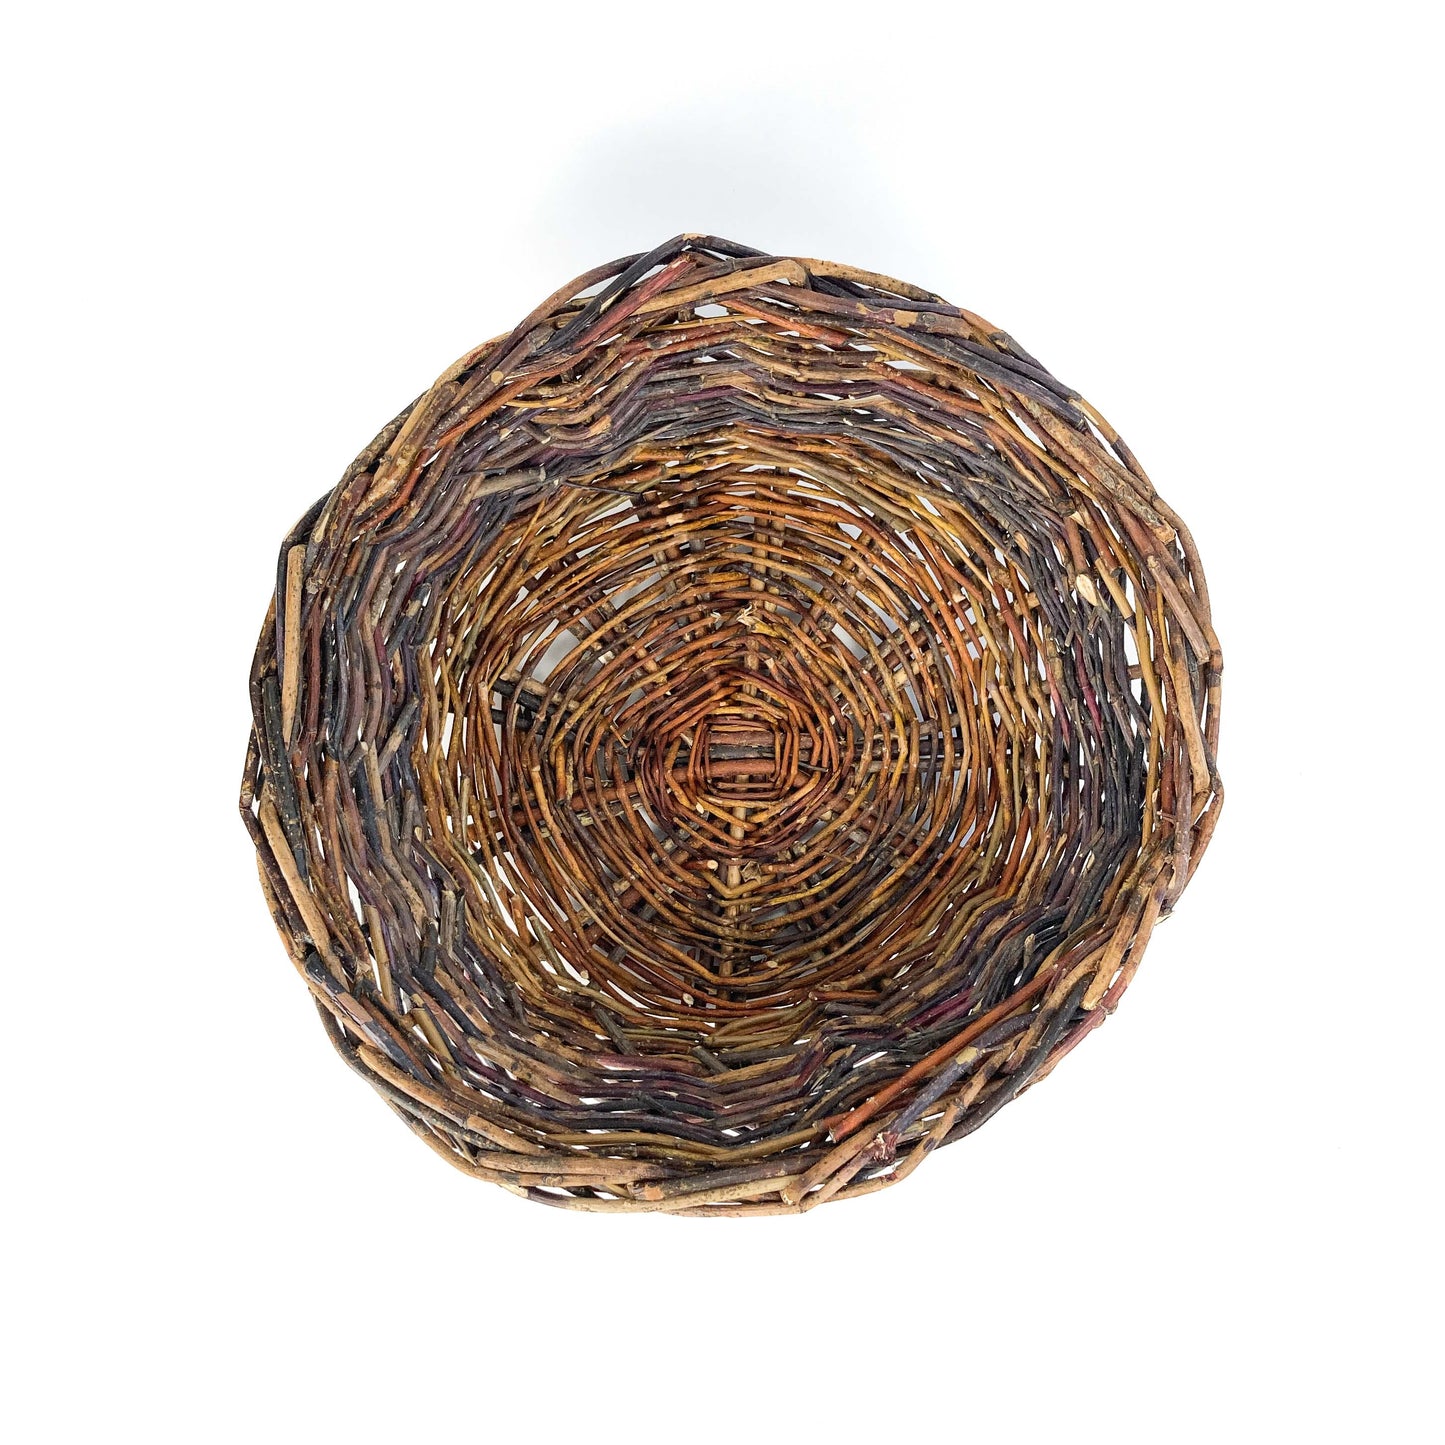 Woven Willow Baskets